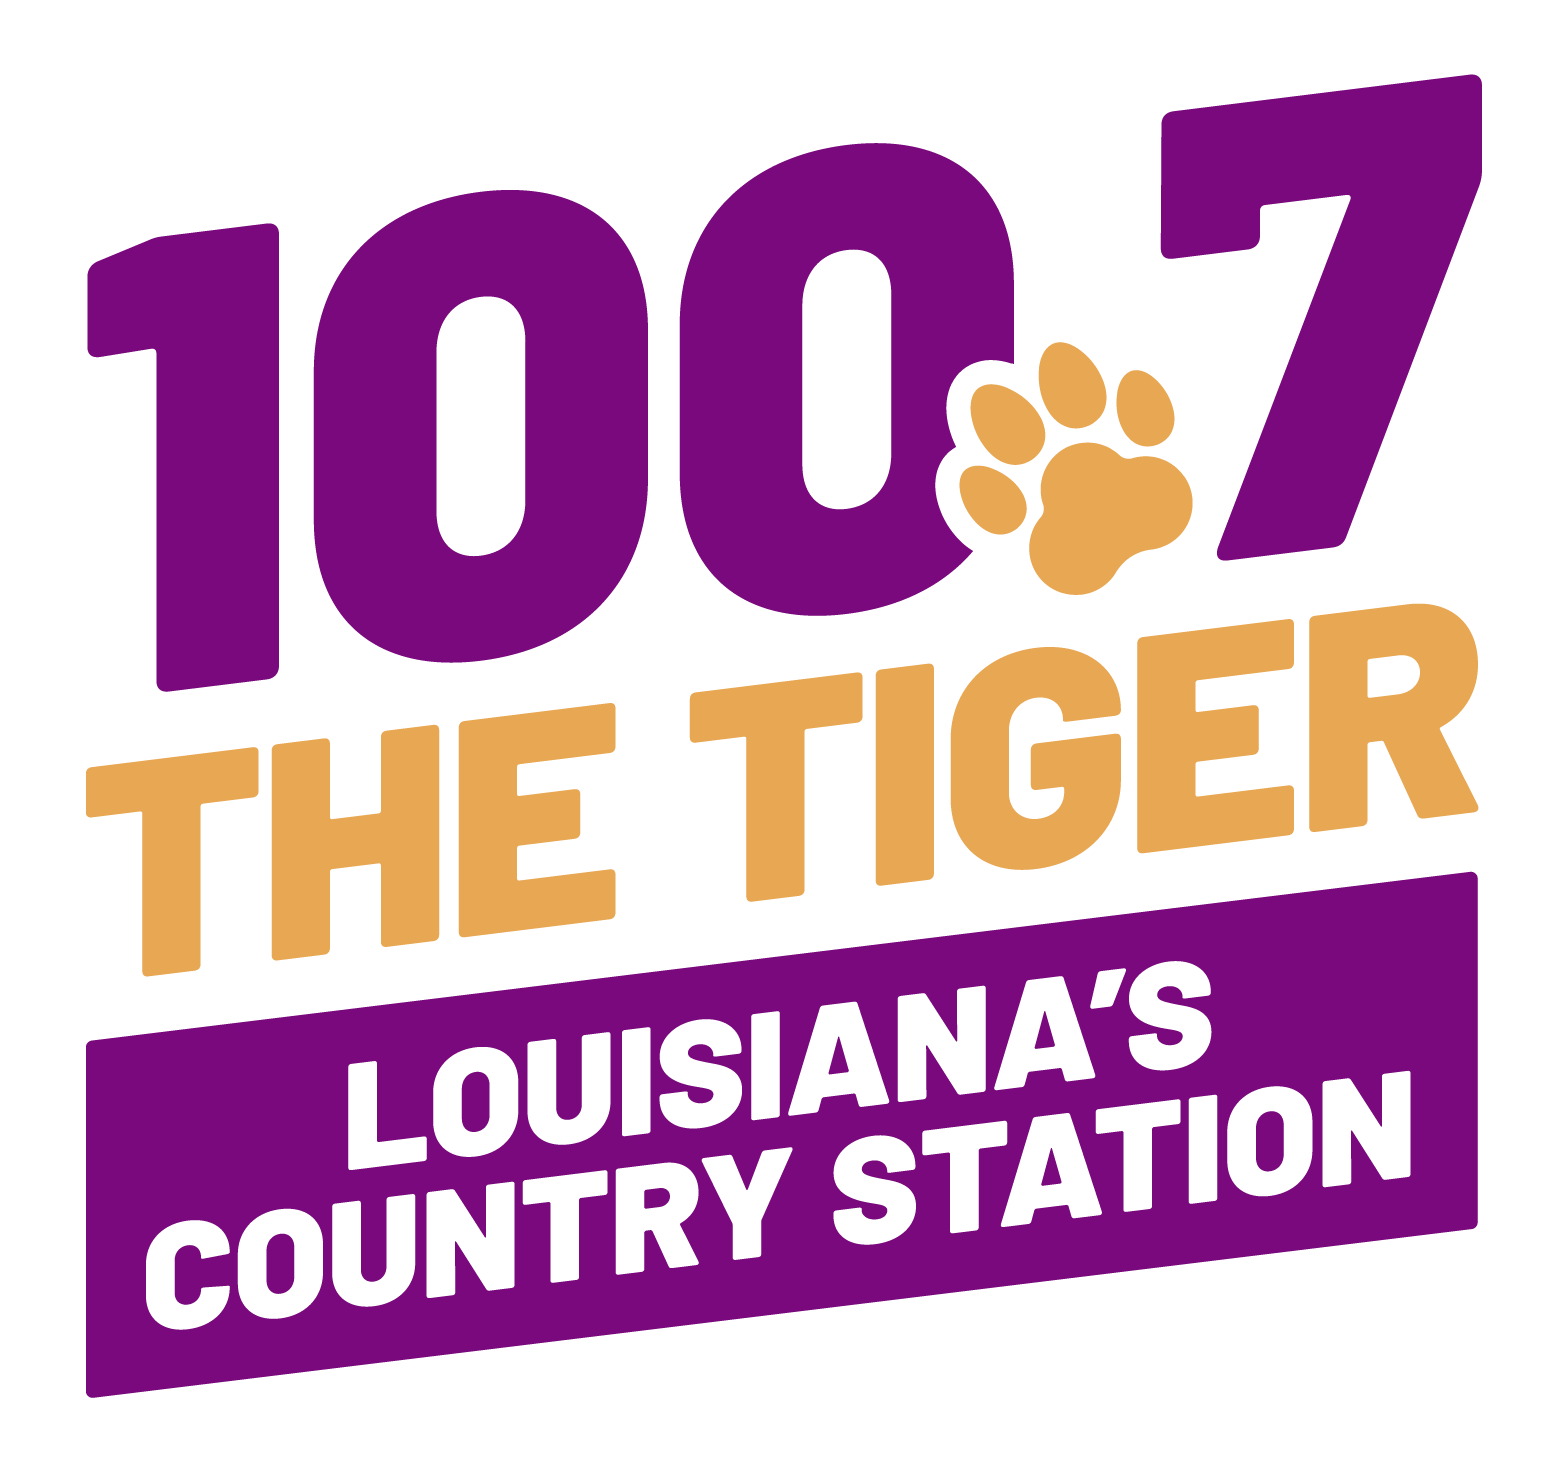 100.7 the tiger. Lousiana's country station